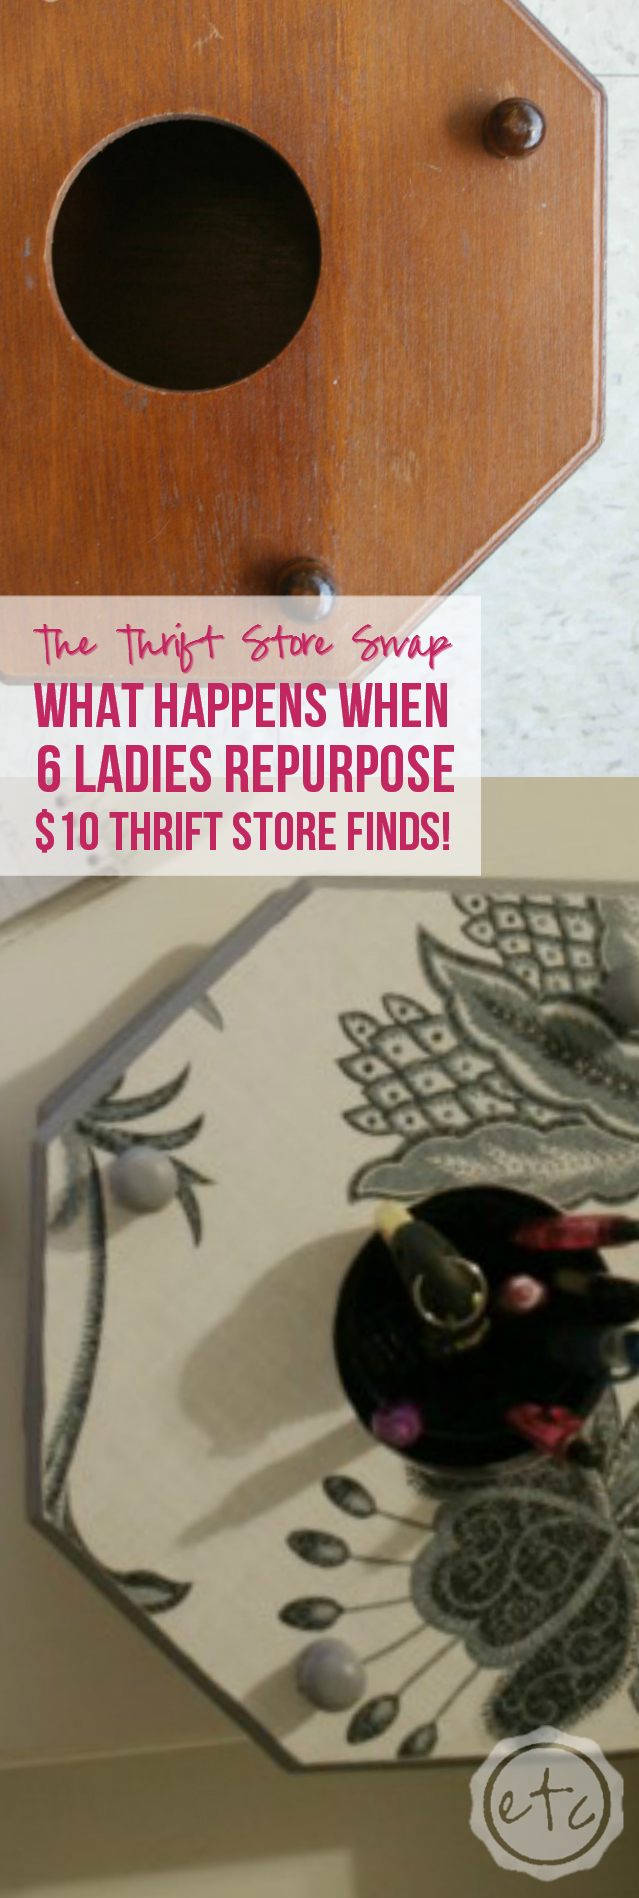 The Thrift Store Swap Reveal with Happily Ever After, Etc.